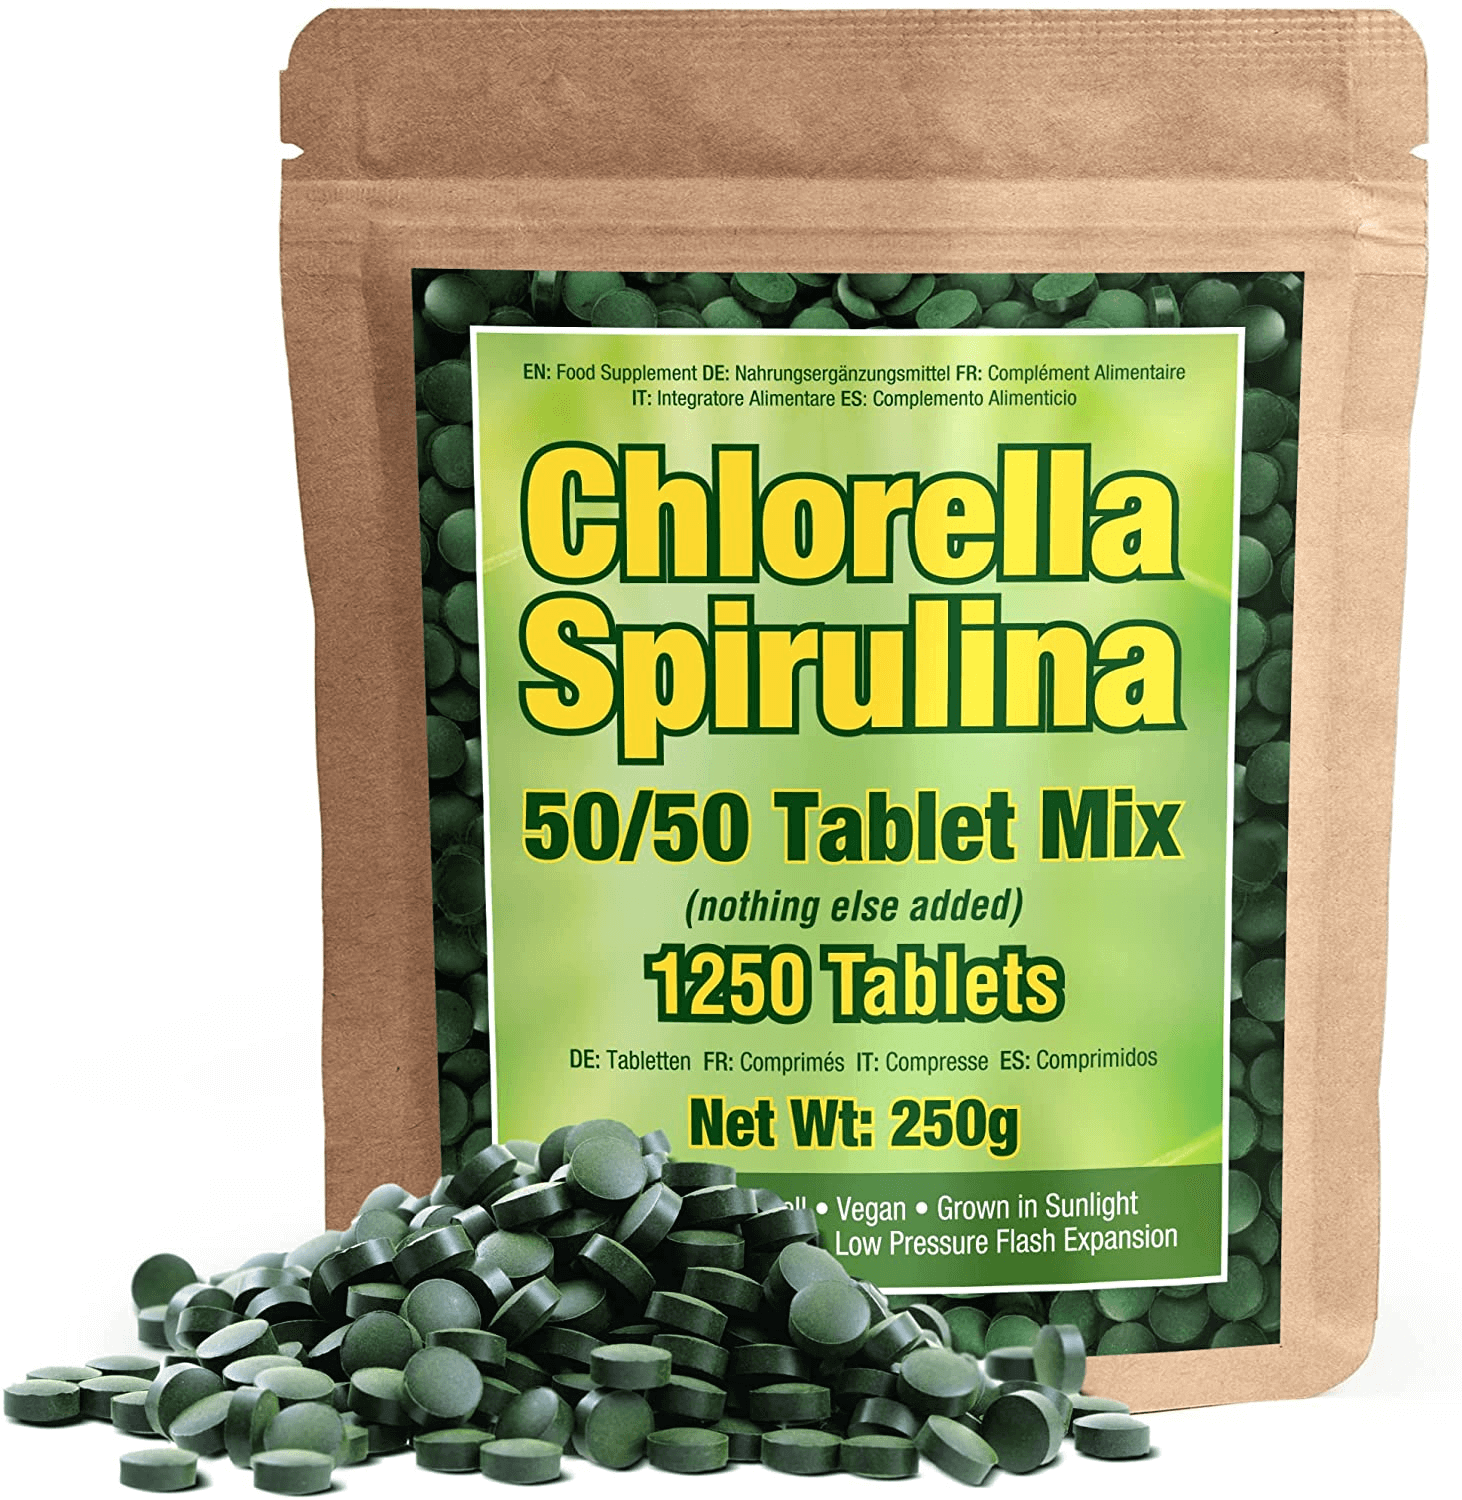 Premium Chlorella Spirulina | 1,250 TABLETS (4 Months Supply) | NON-GMO | Vegan Organic Capsules | Cracked Cell Wall | Alkalizing | High Protein with Iron, Zinc, Chlorophyll | by Good Natured - vitamenstore.com